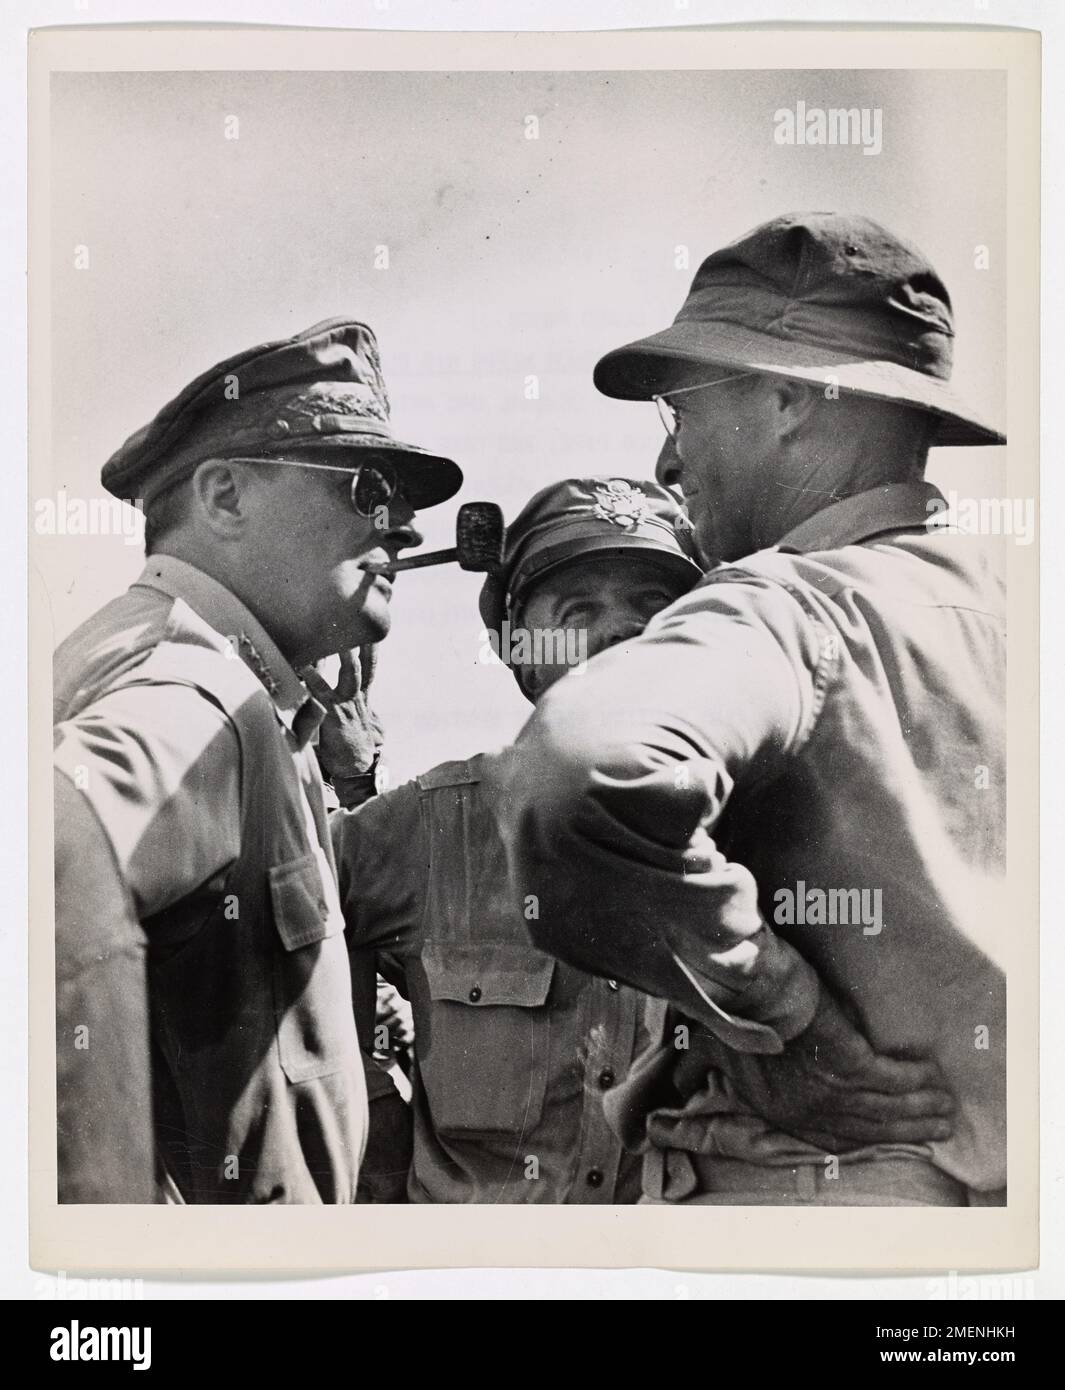 MacArthur Keeps His Pledge. This remarkable study of General MacArthur, nonchalantly puffing on his corncob pipe, was made by a Coast Guard combat photographer at the historic moment when Mac Arthur surveyed the Leyte Island beachhead and saw his famous 'I will Return' pledge fulfilled. Stock Photo